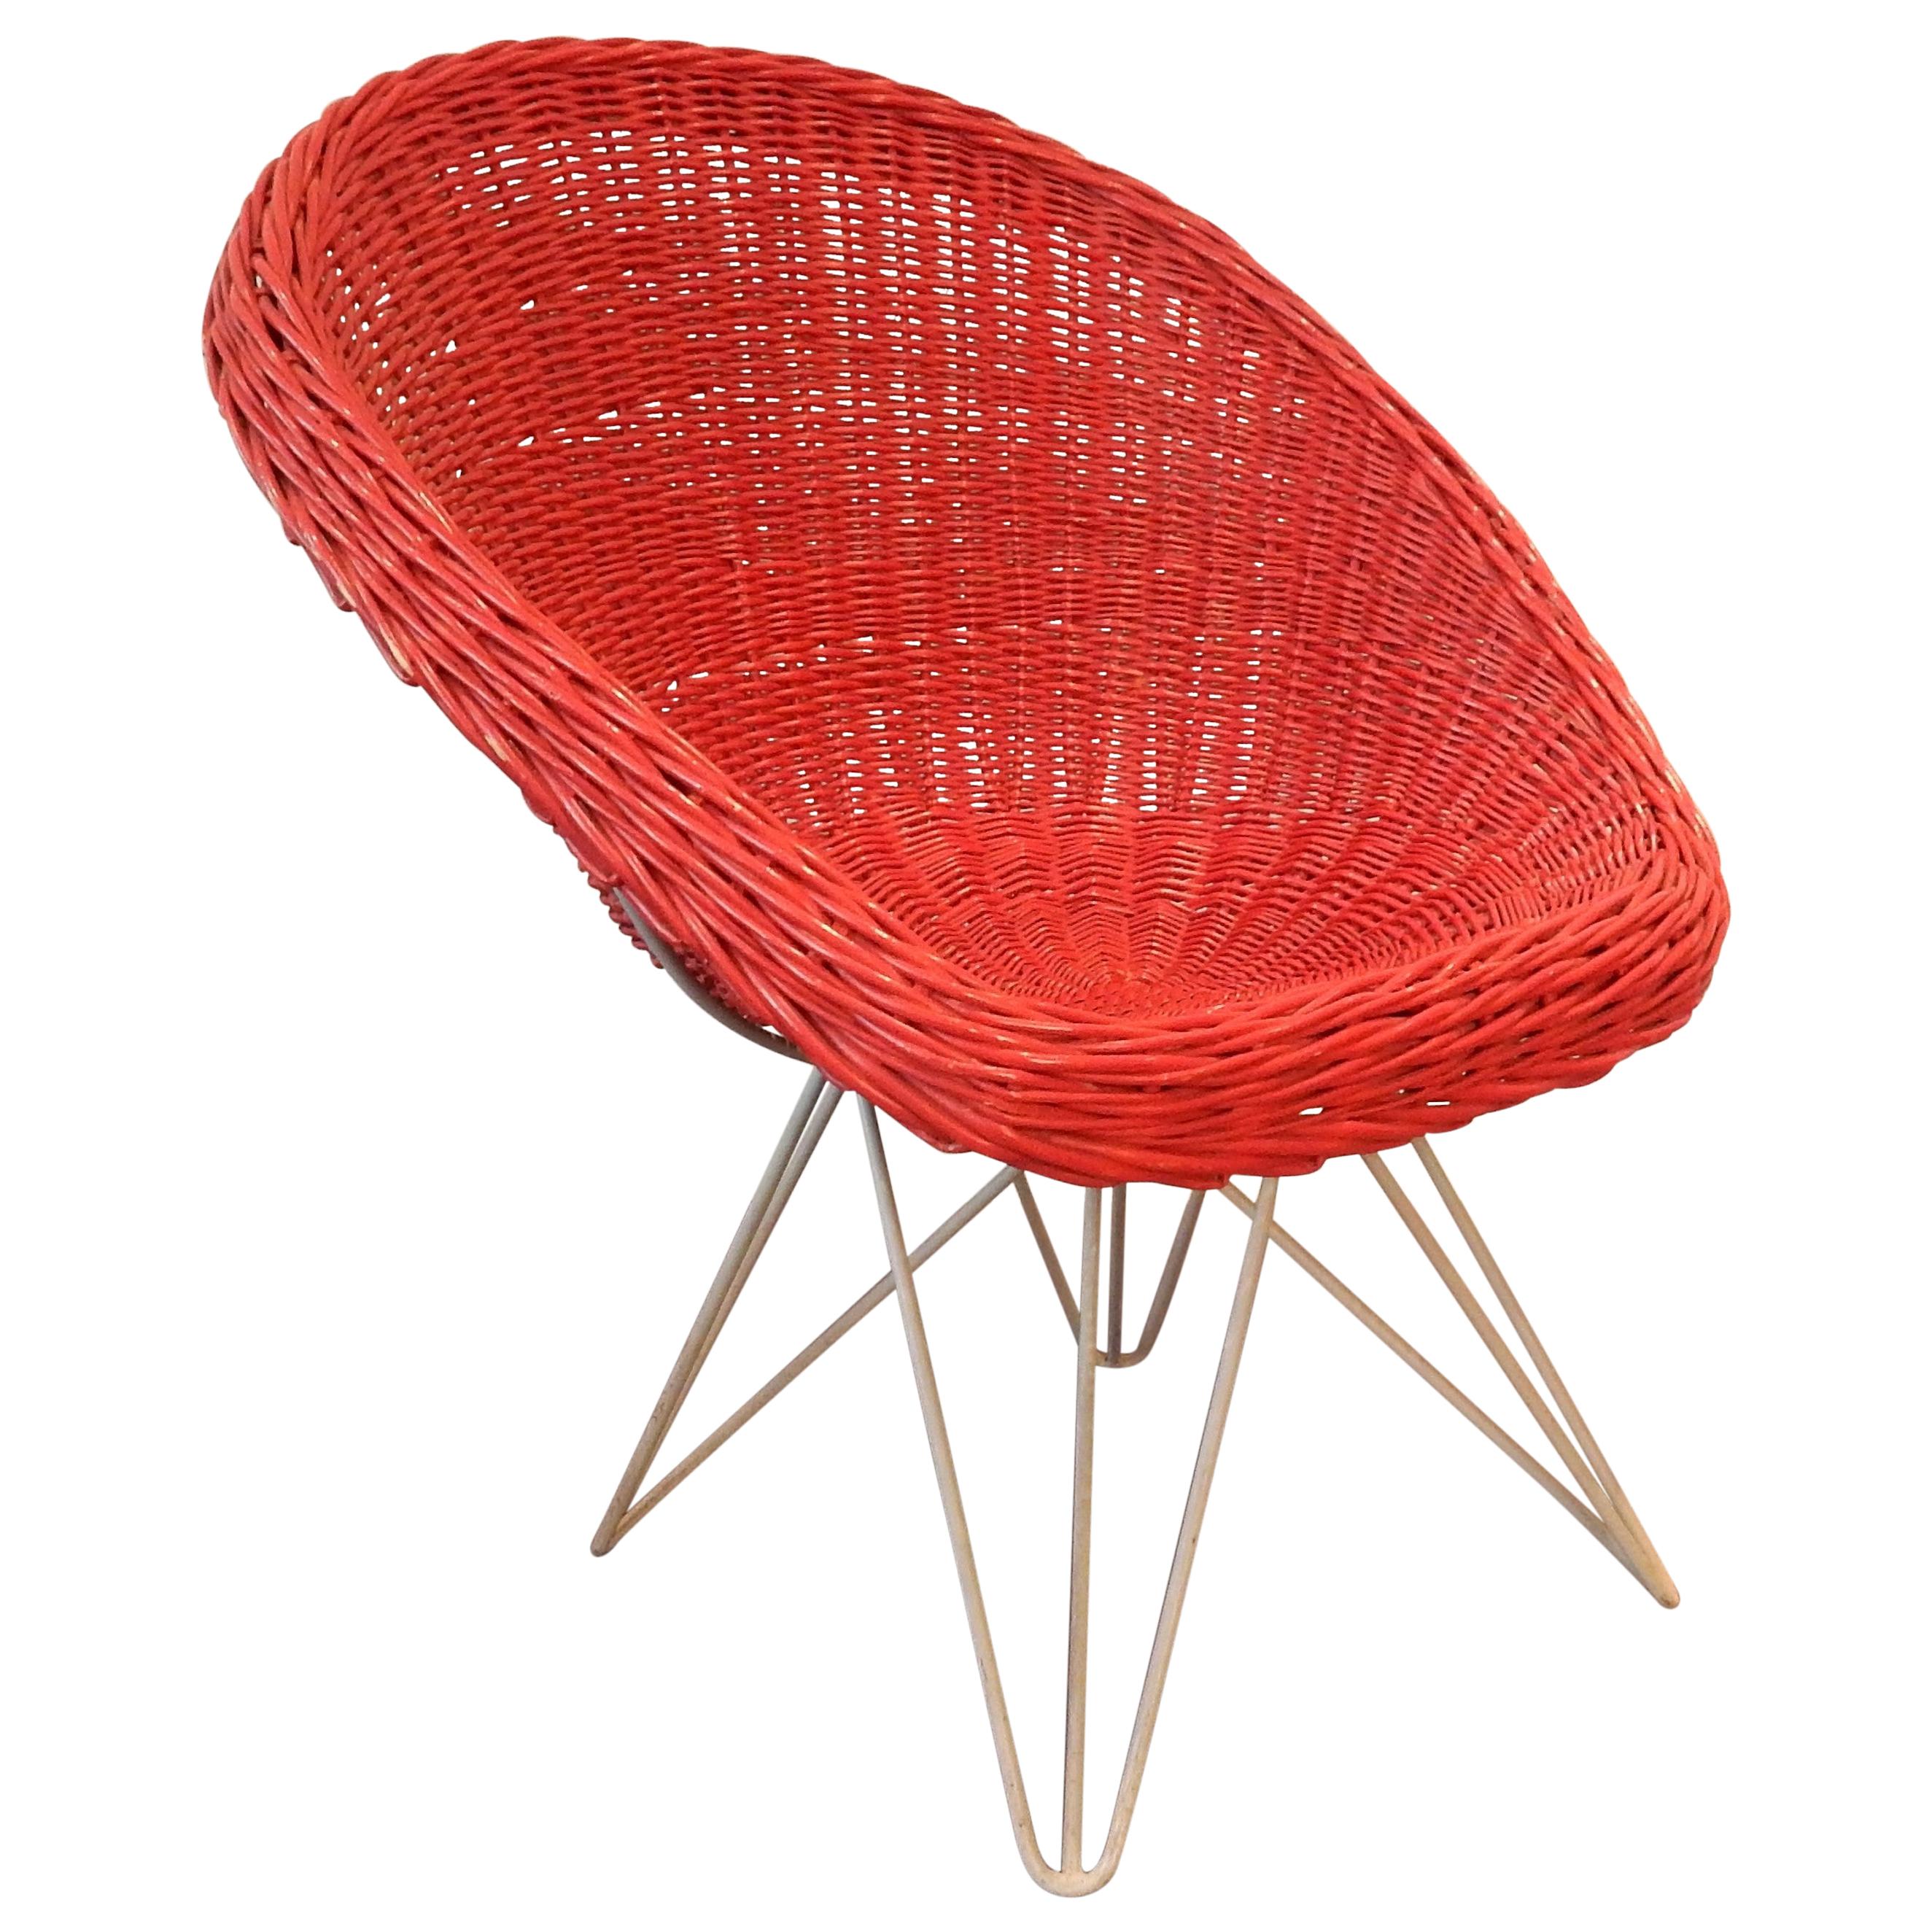 Red Rattan Lounge Chair by Teun Velthuizen for Urotan, The Netherlands, 1950s For Sale